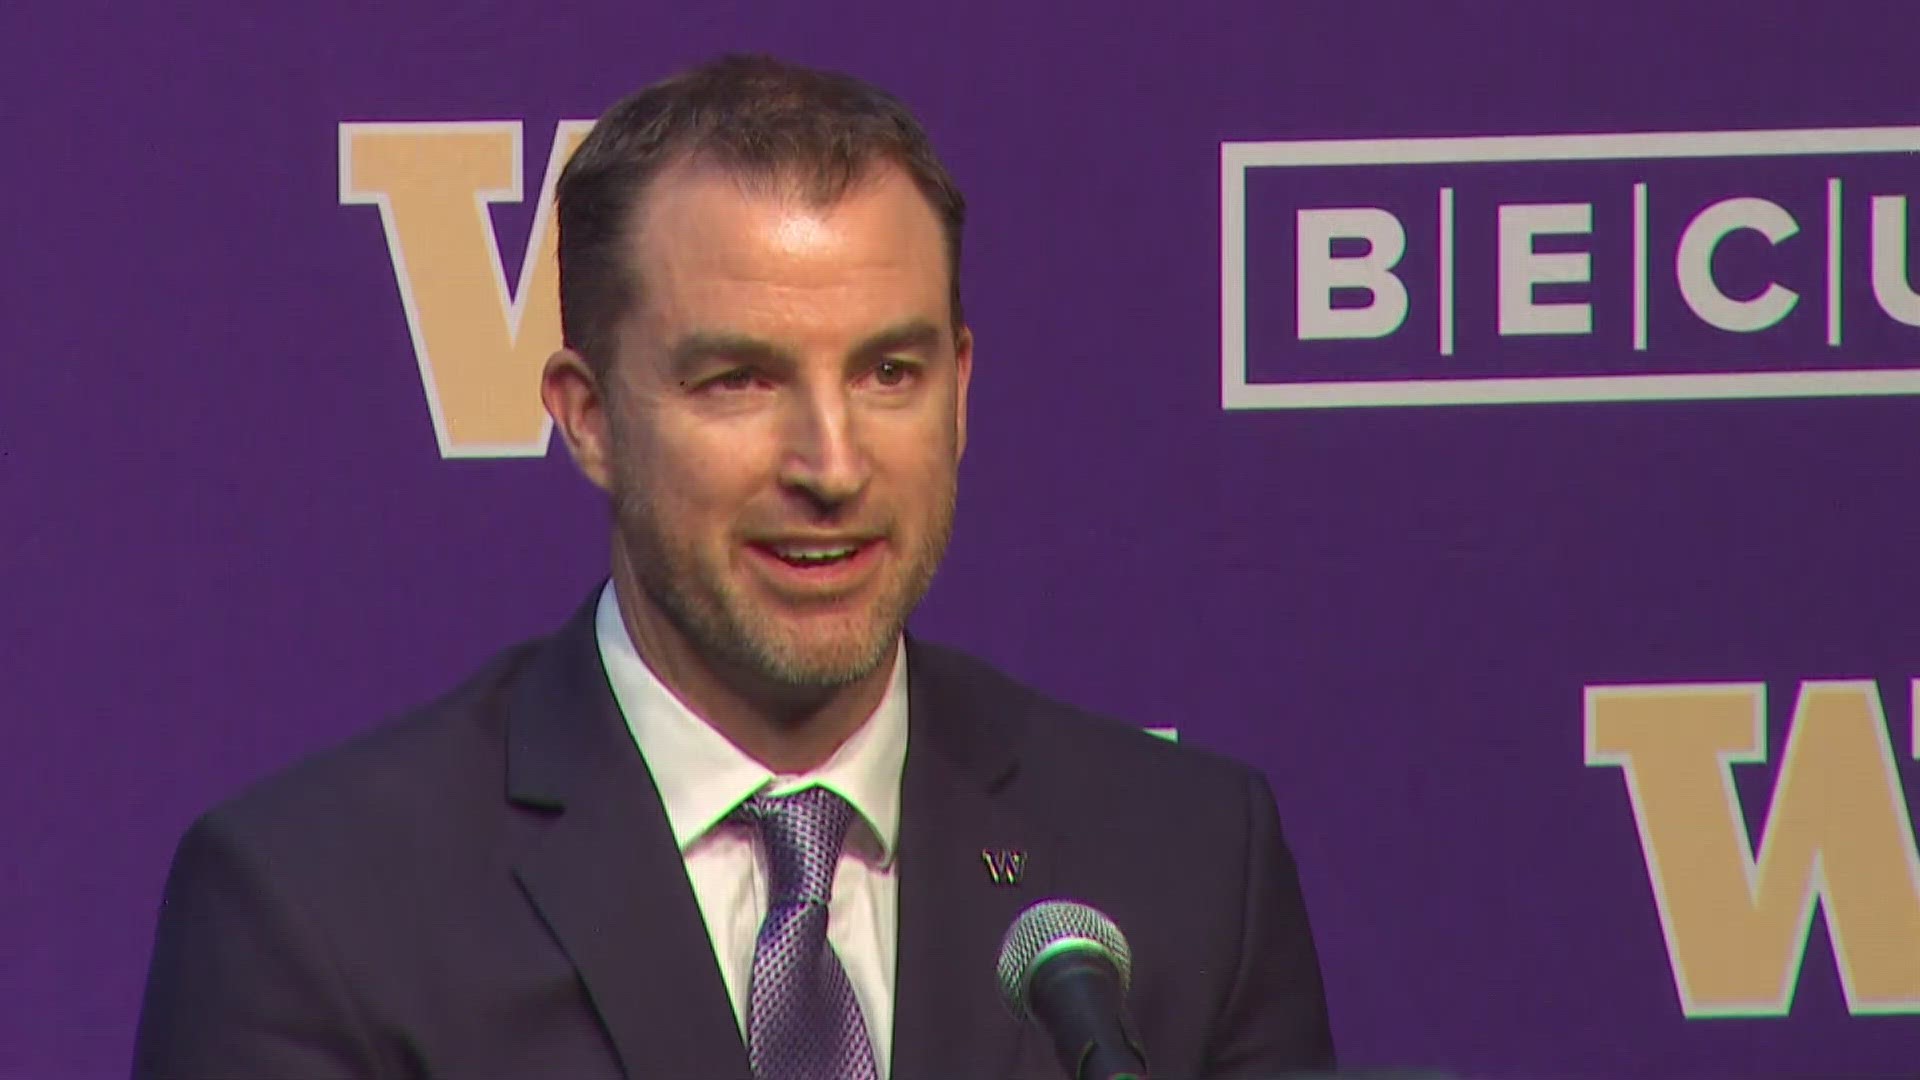 Washington Huskies men's basketball coach Danny Sprinkle replaces Mike Hopkins at the helm.